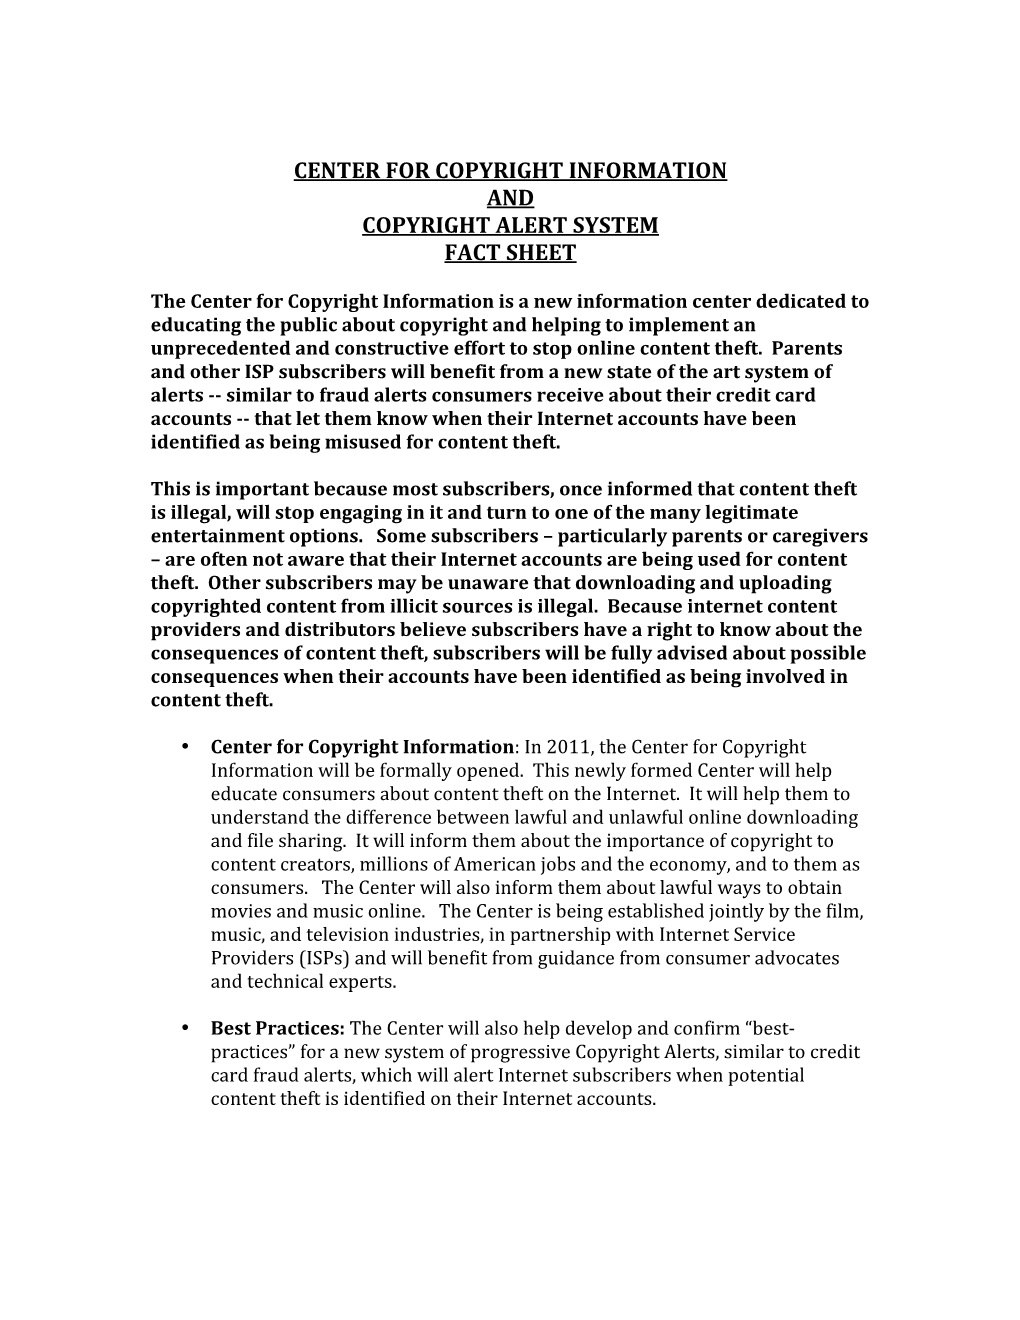 Center for Copyright Information and Copyright Alert System Fact Sheet